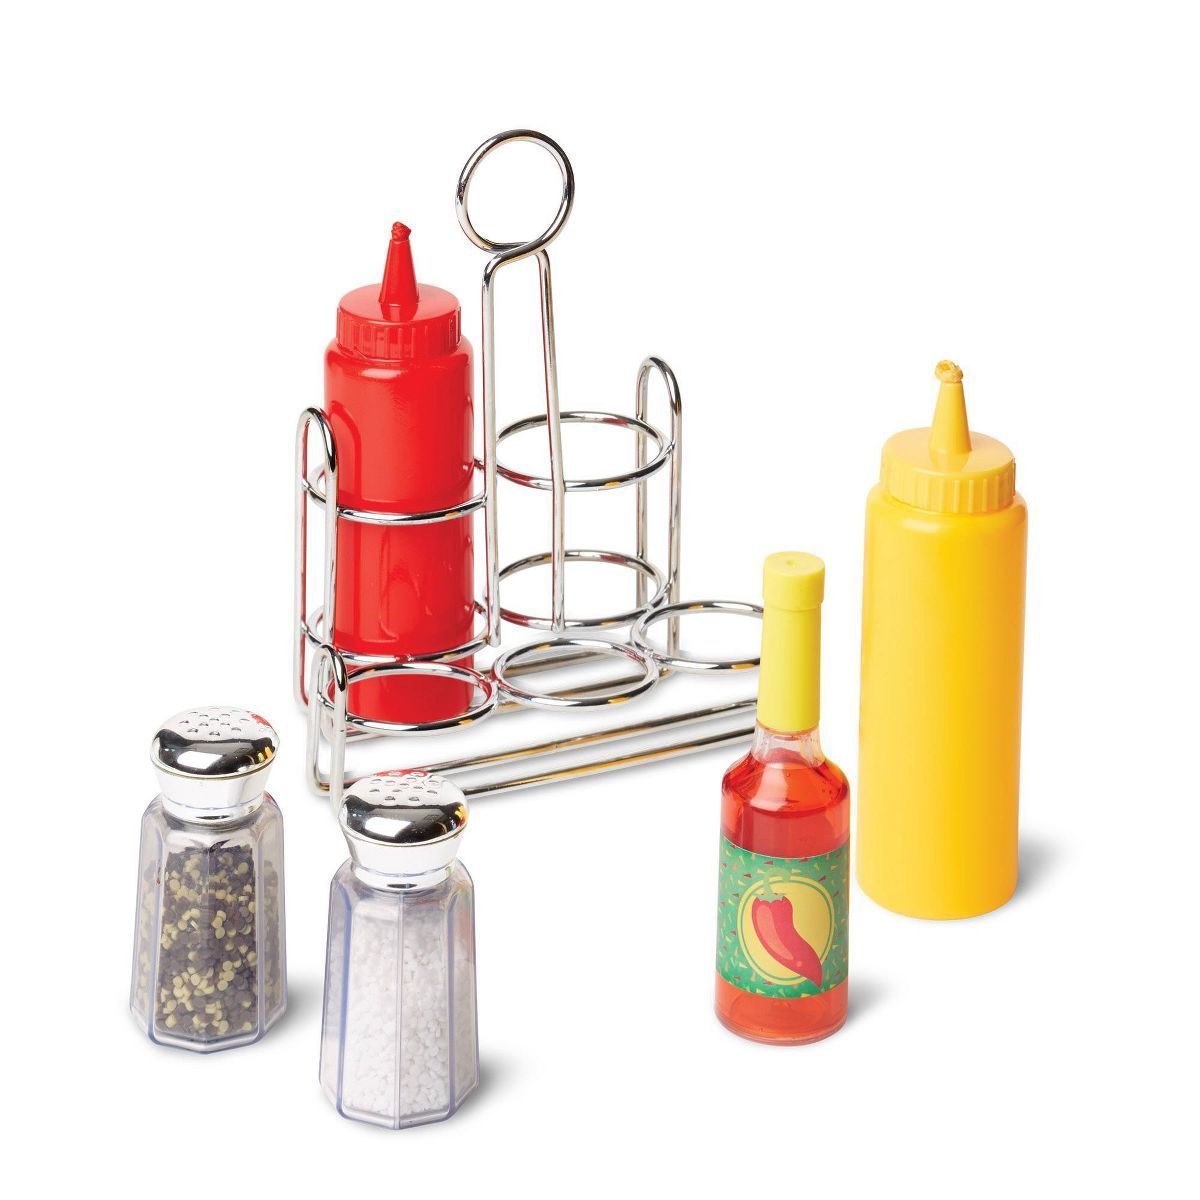 Melissa & Doug Condiments Set (6pc) - Play Food, Stainless Steel Caddy | Target